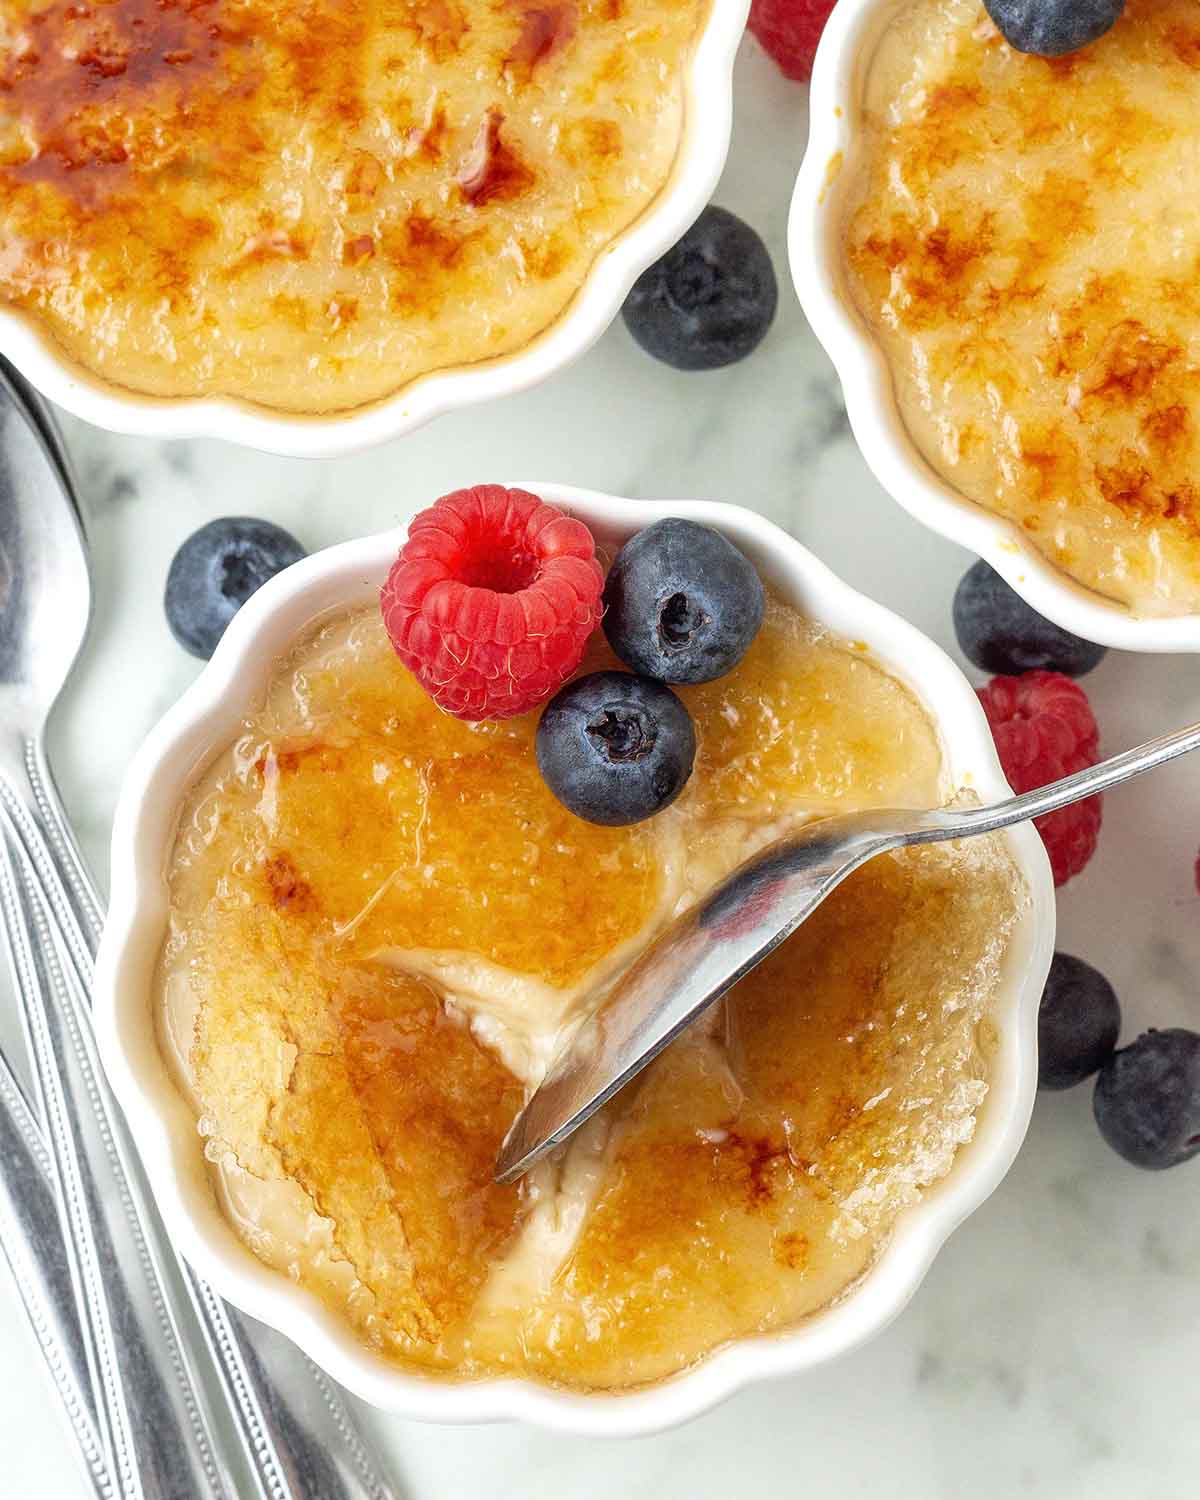 An overhead image of dairy-free crème brulee, a spoon is cracking the golden caramelized sugar shell.